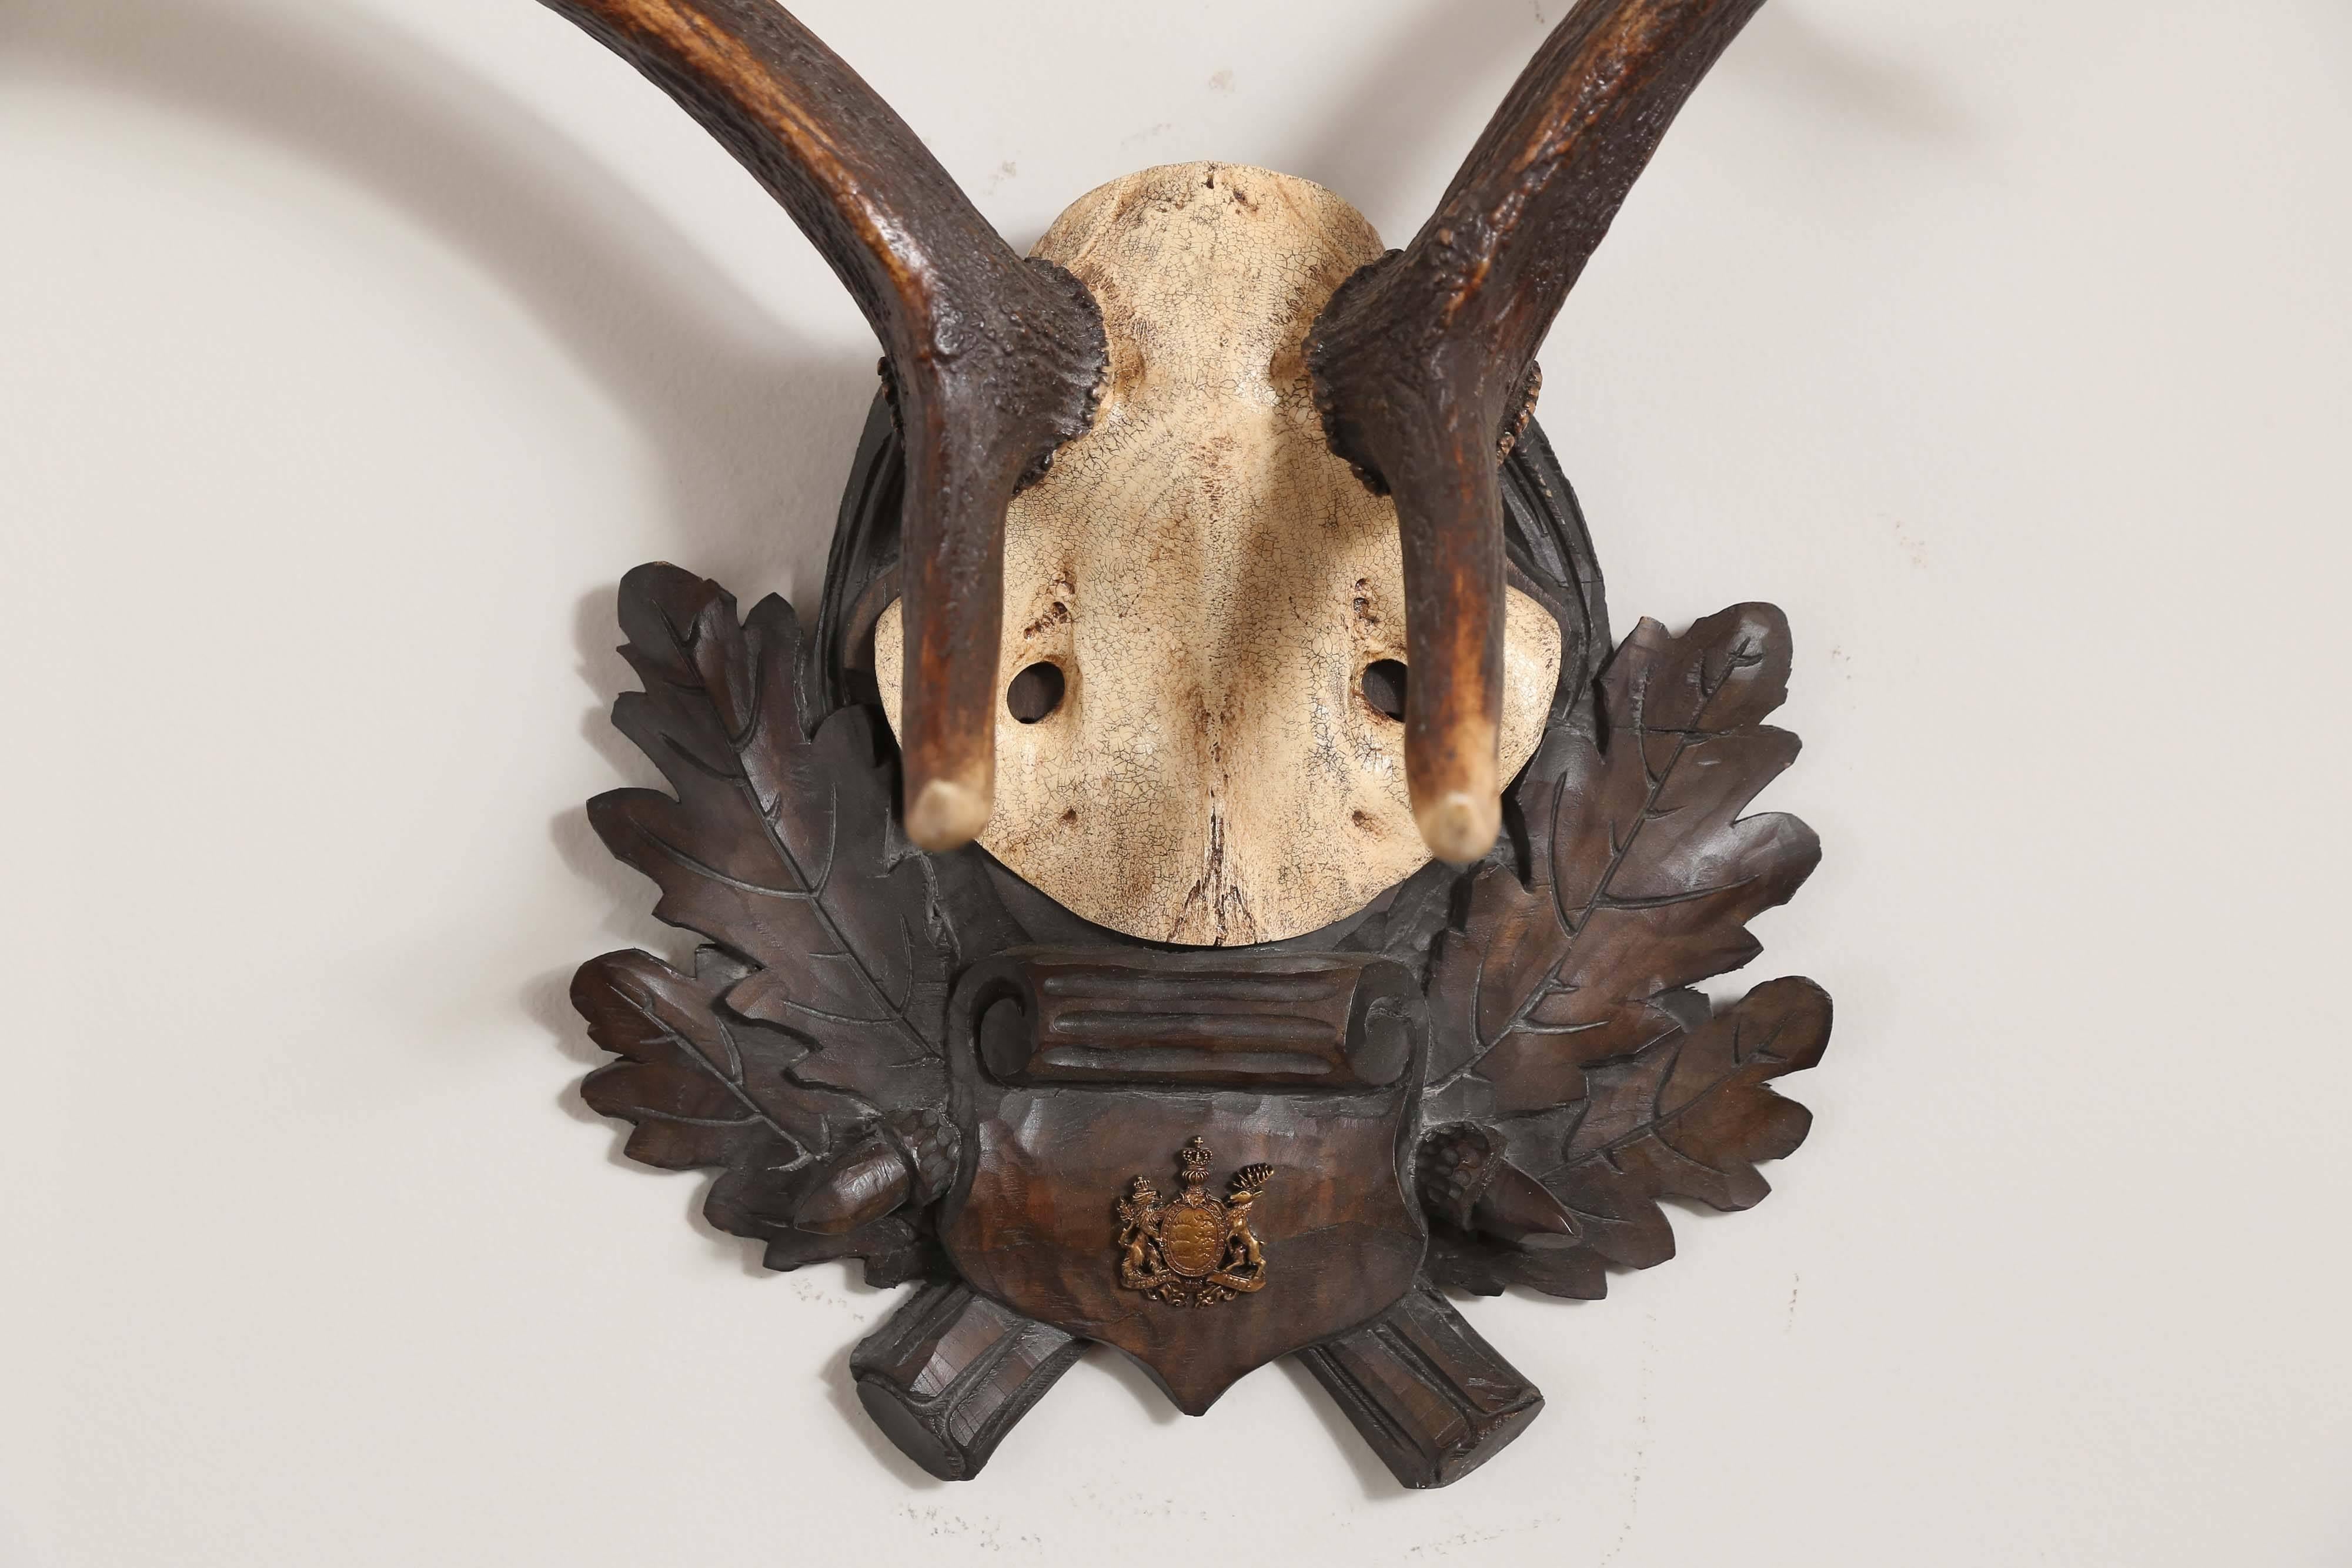 This is a 19th century German fallow deer trophy on an original, hand-carved Black Forest plaque with the original badge of Ko¨nig (King) Wilhelm of Württemberg, Germany.

Plaque measures approximately 11